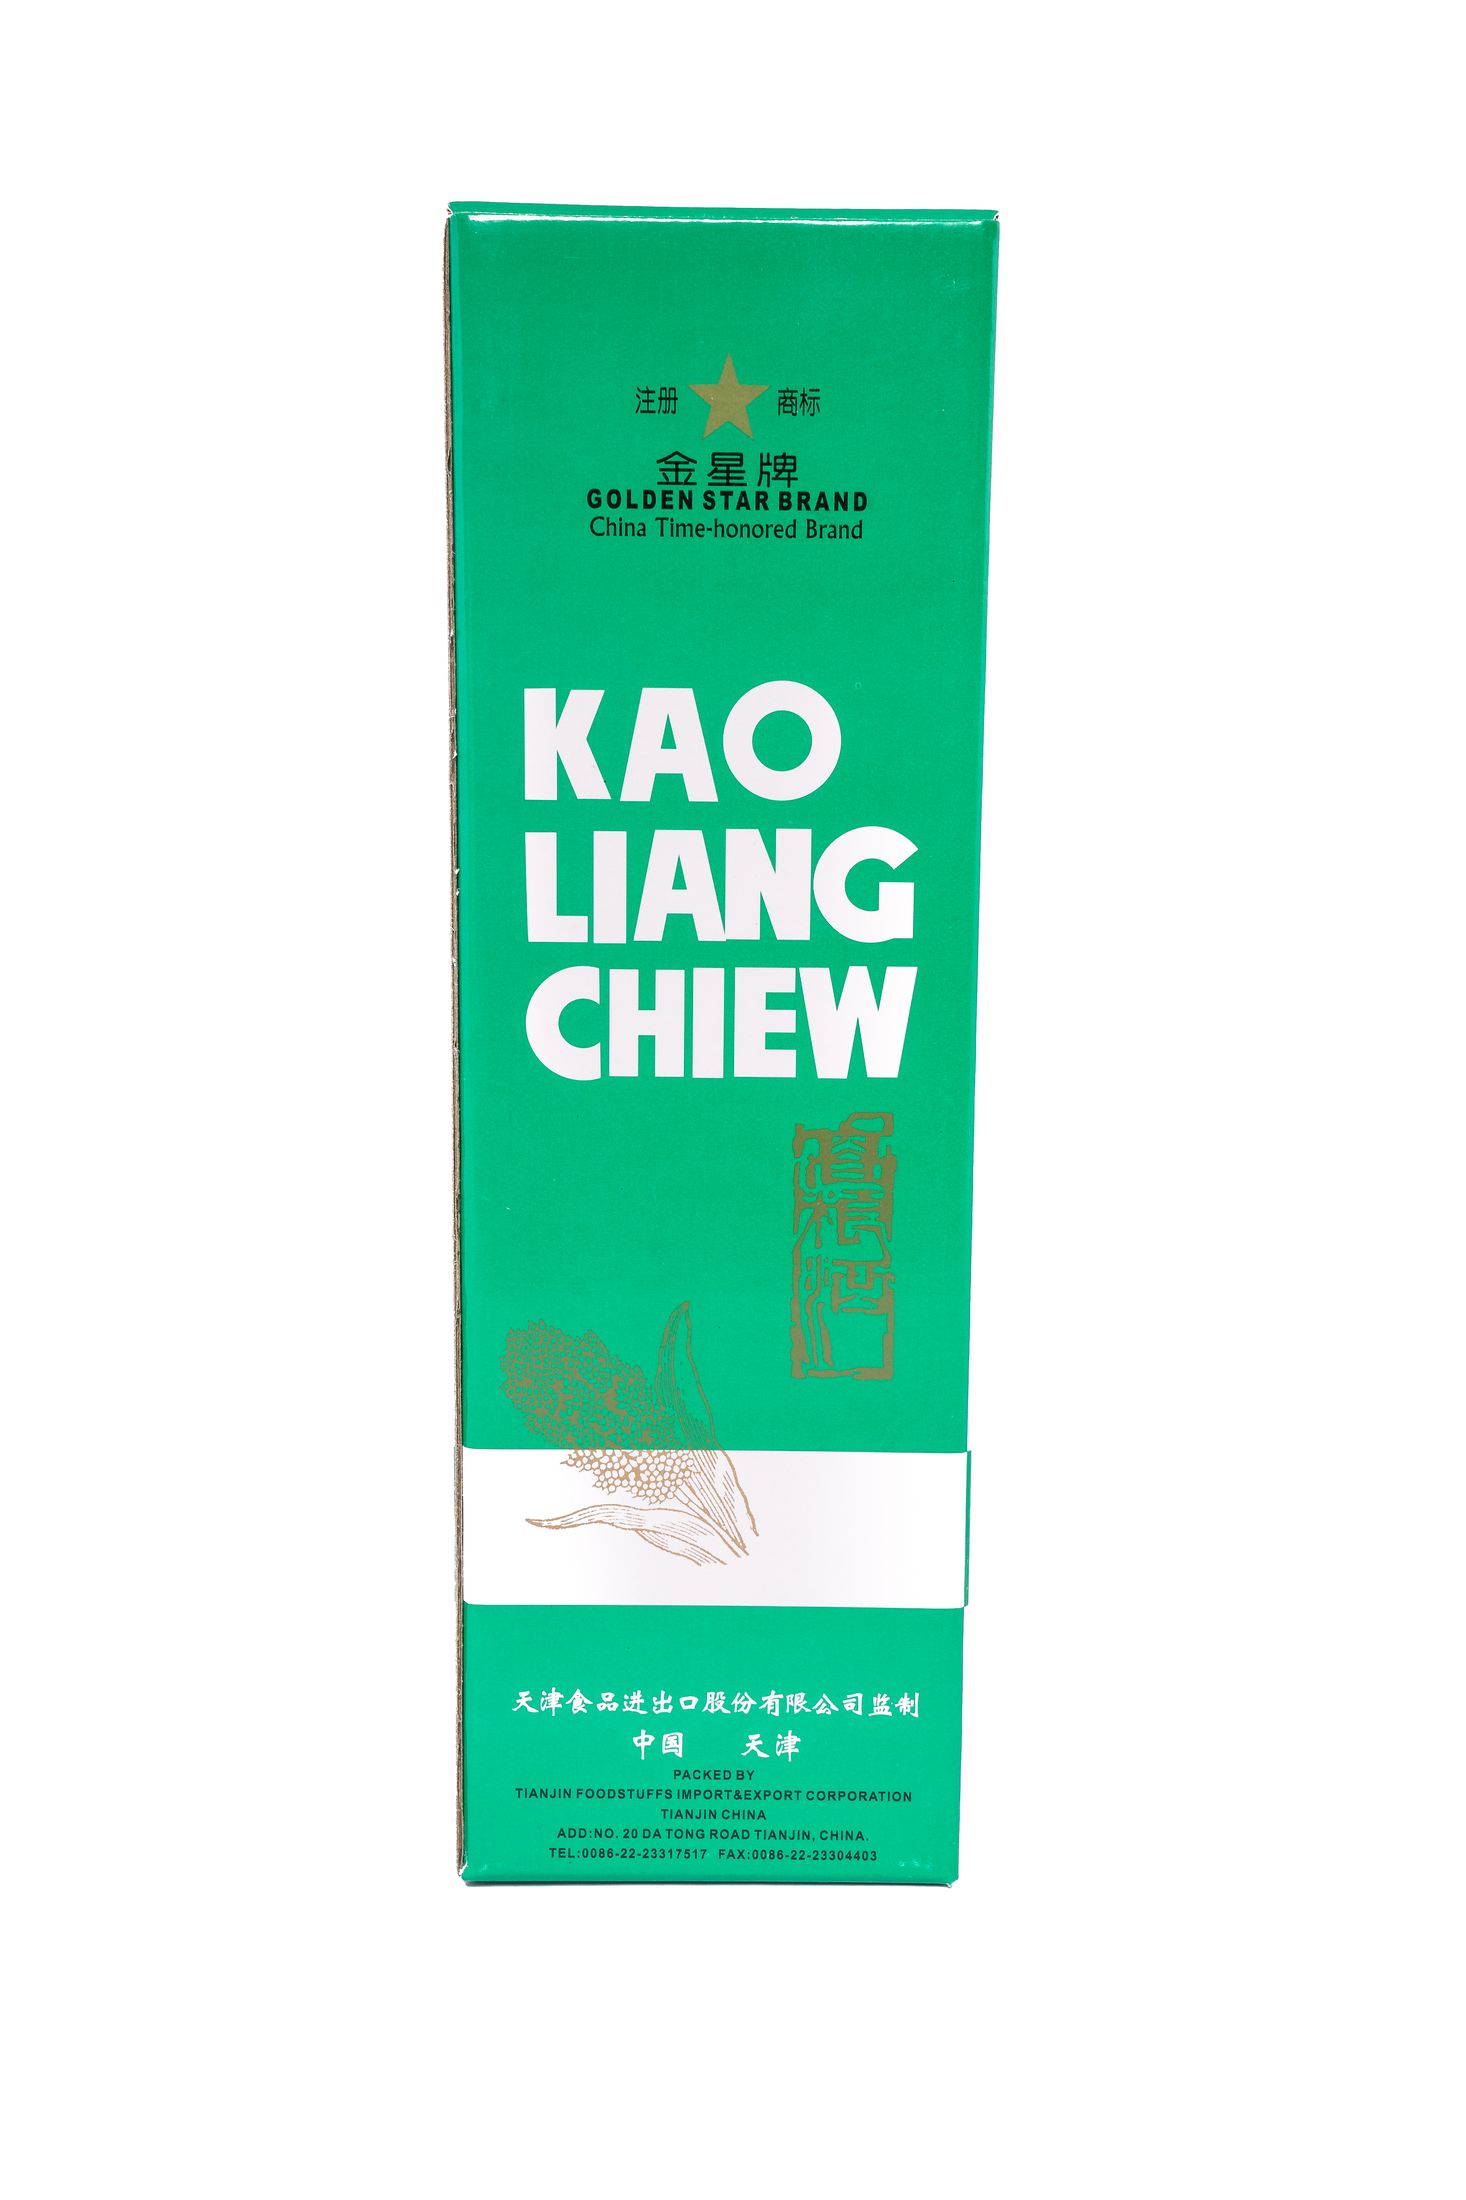 Golden Star Kao liang chiew 62% ALC.